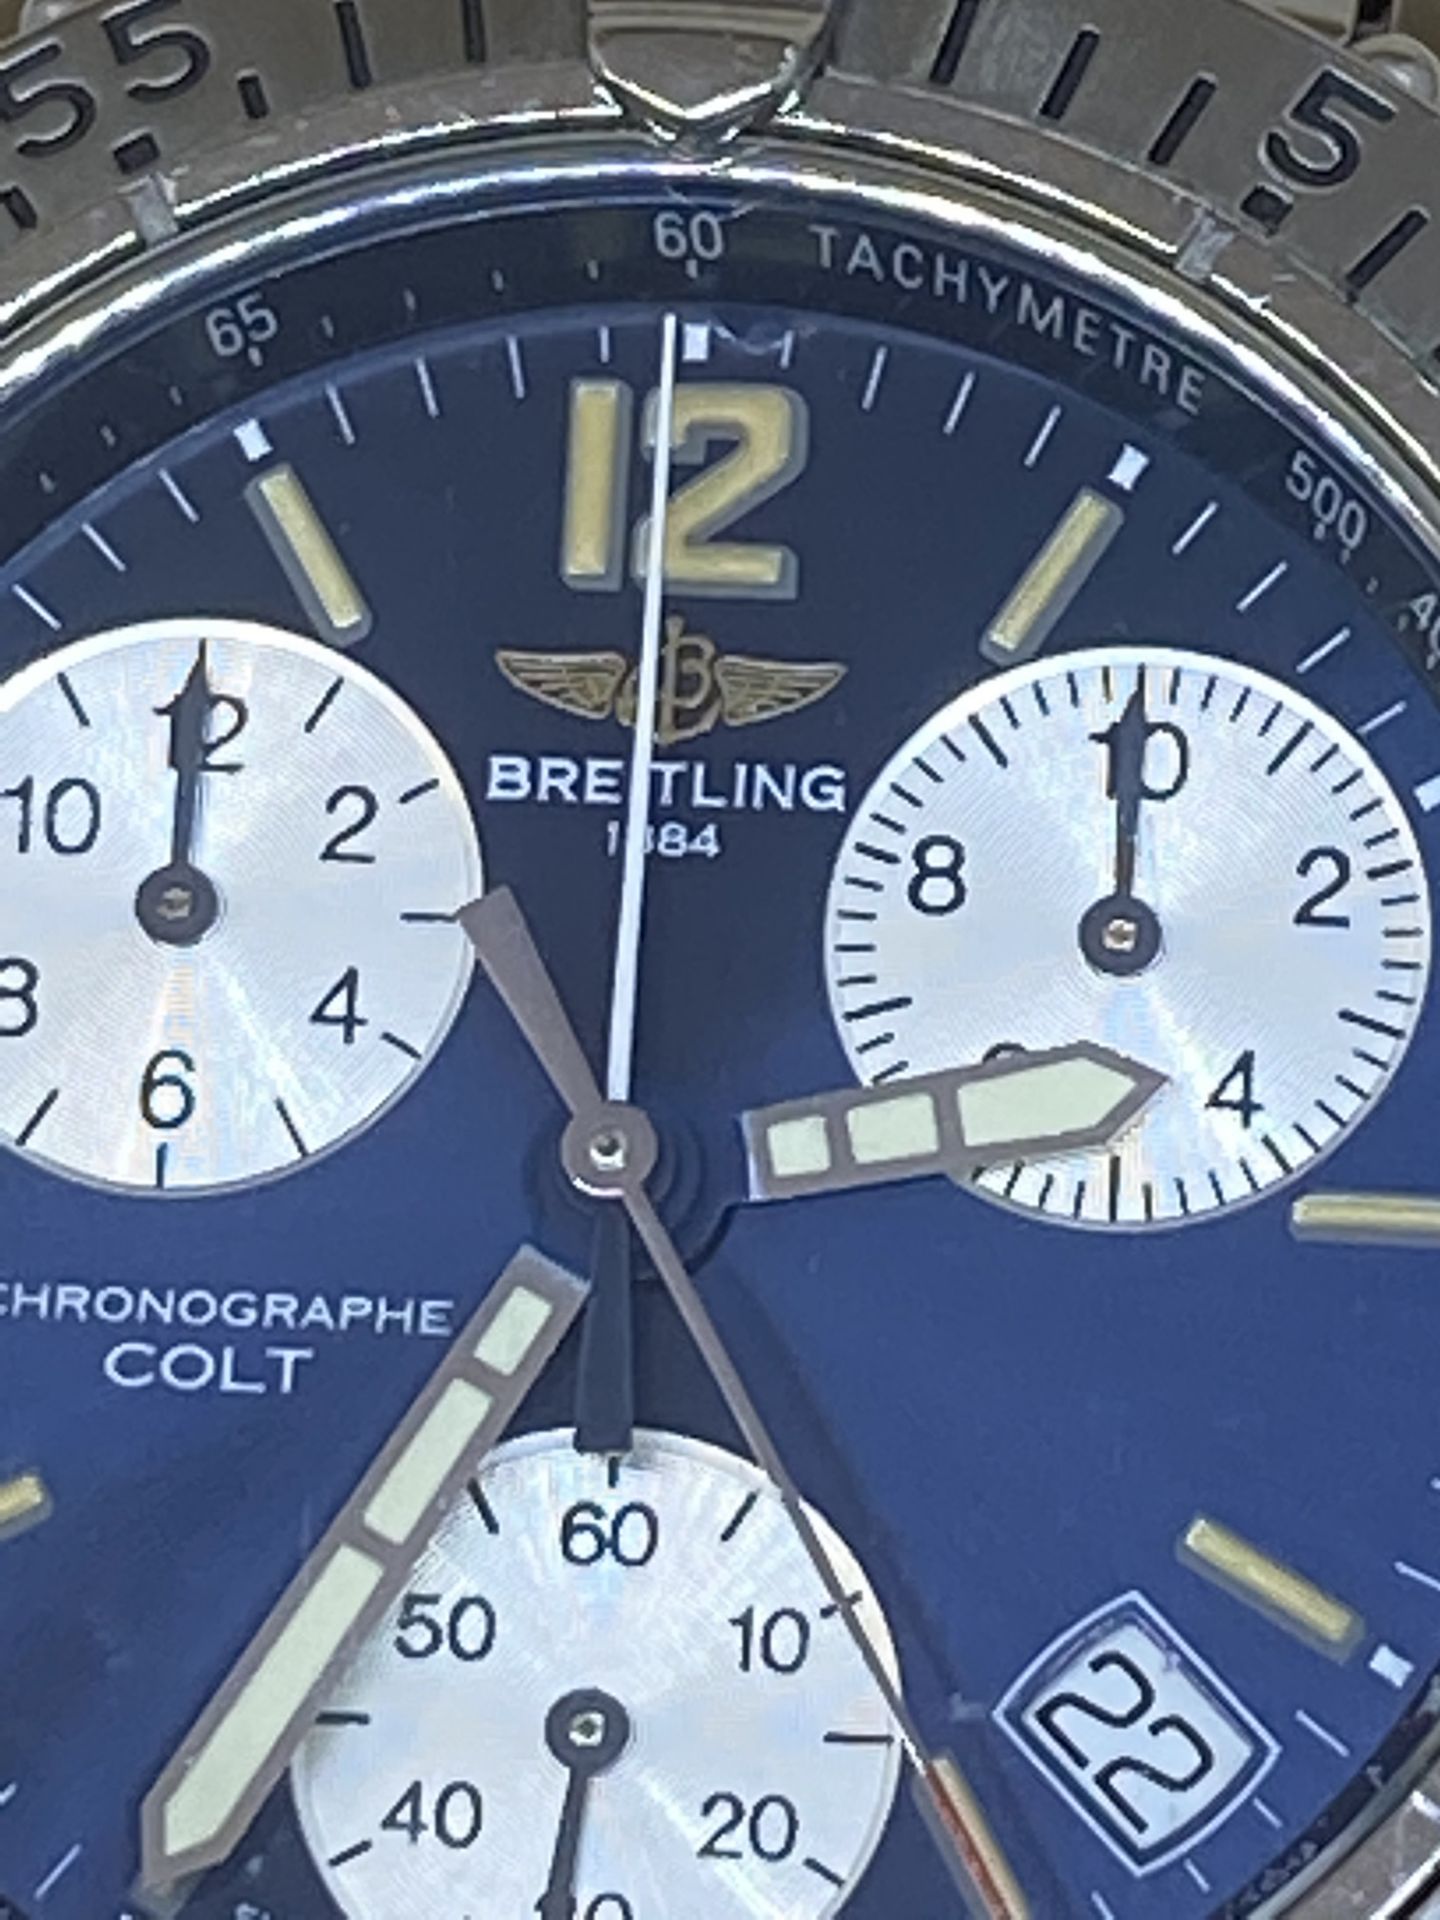 BREITLING CHRONOGRAPH STAINLESS STEEL WATCH - Image 4 of 13